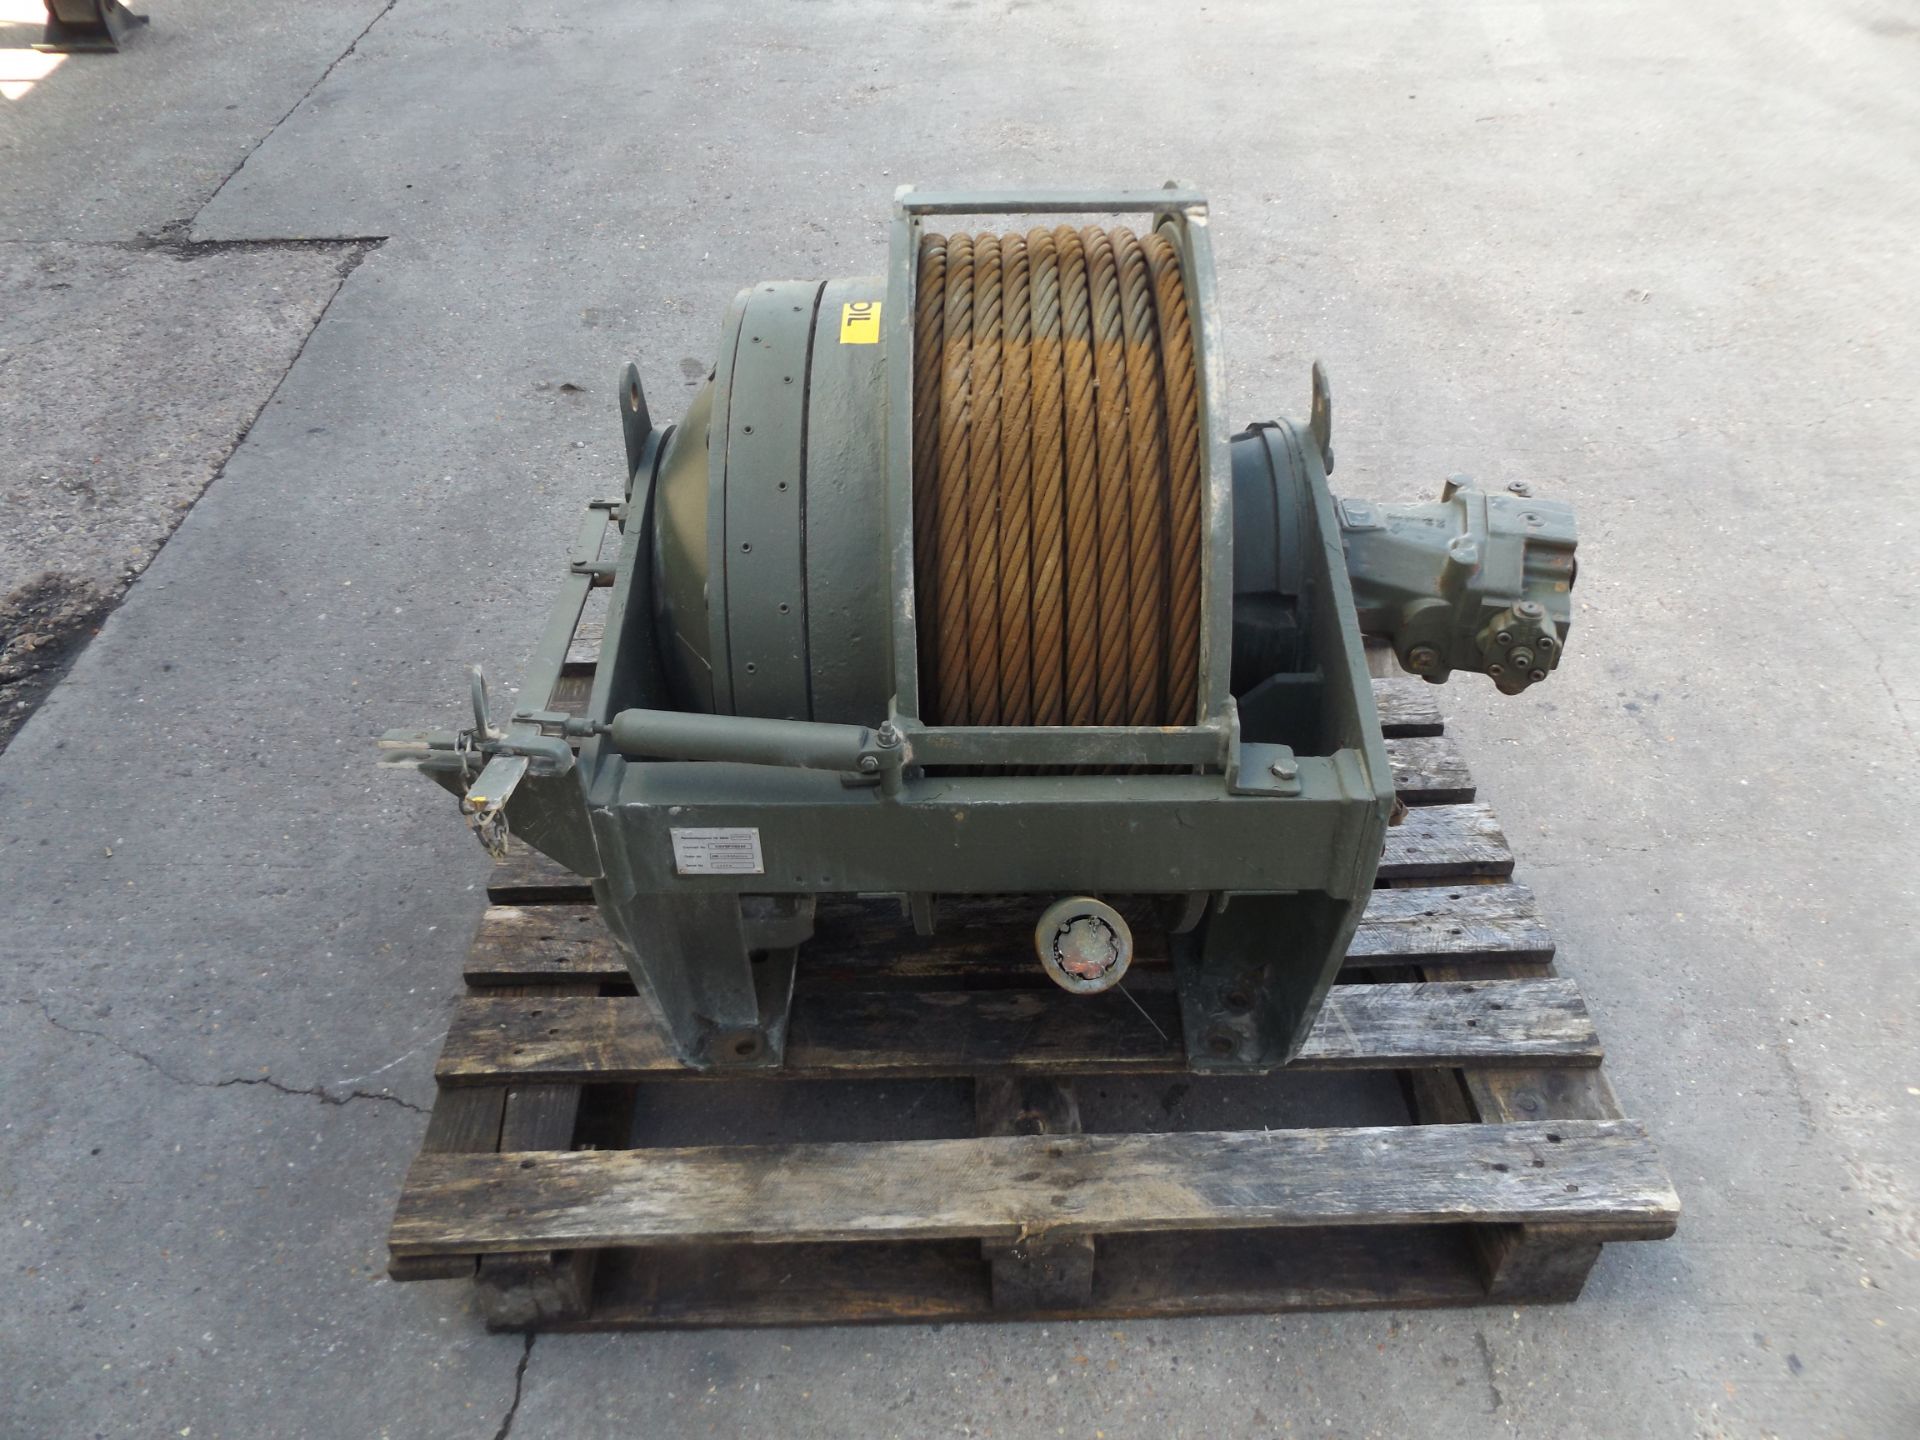 Rotzler 25 Ton Foden 6x6 Recovery Vehicle Mounted Hydraulic Winch - Image 6 of 8